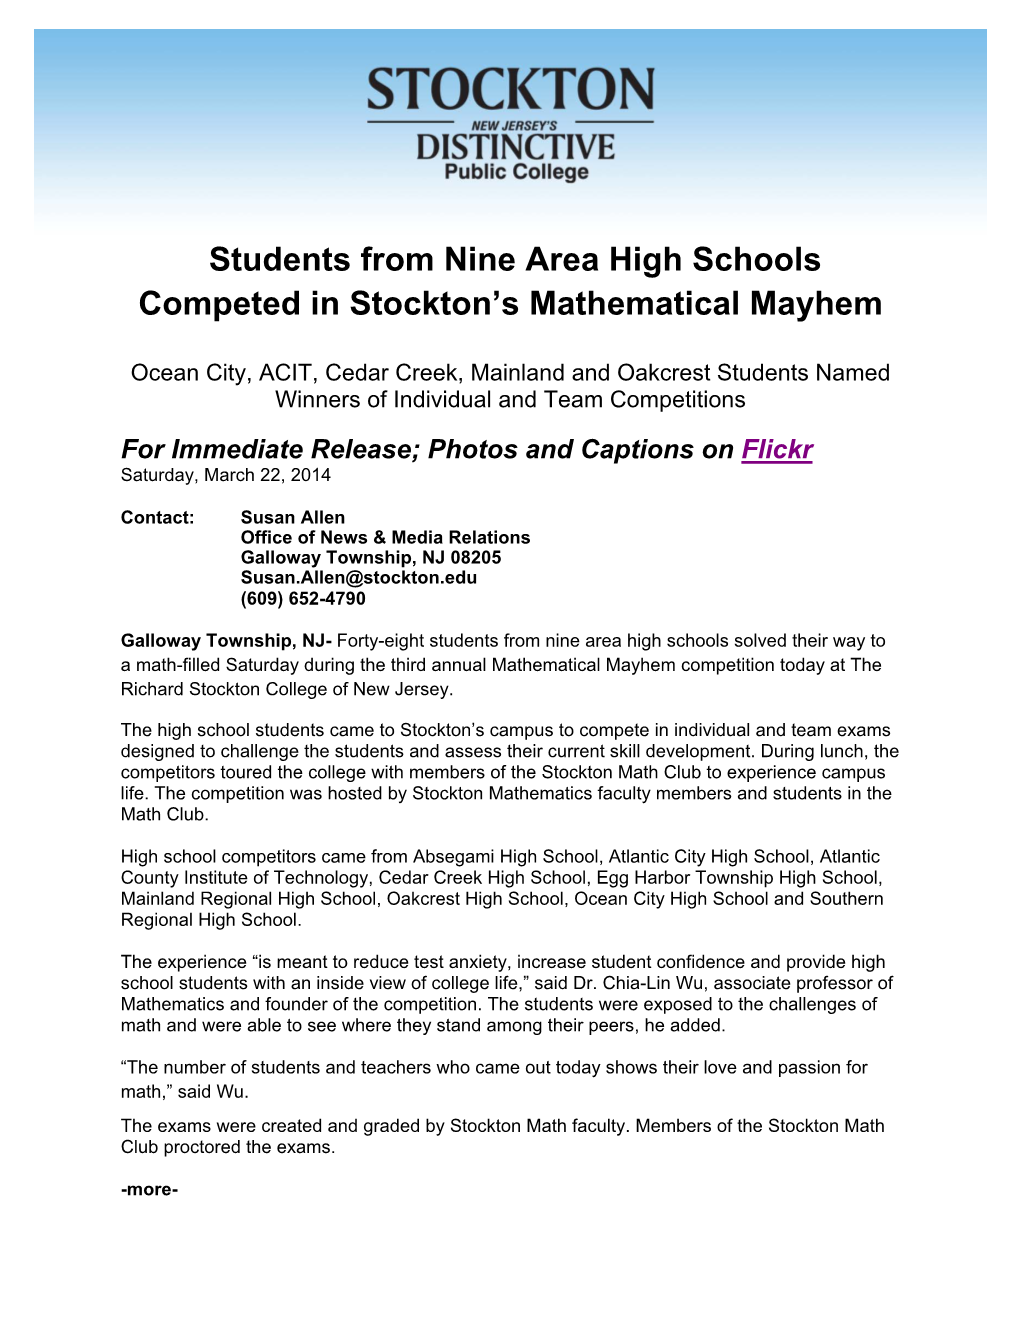 Students from Nine Area High Schools Competed in Stockton's